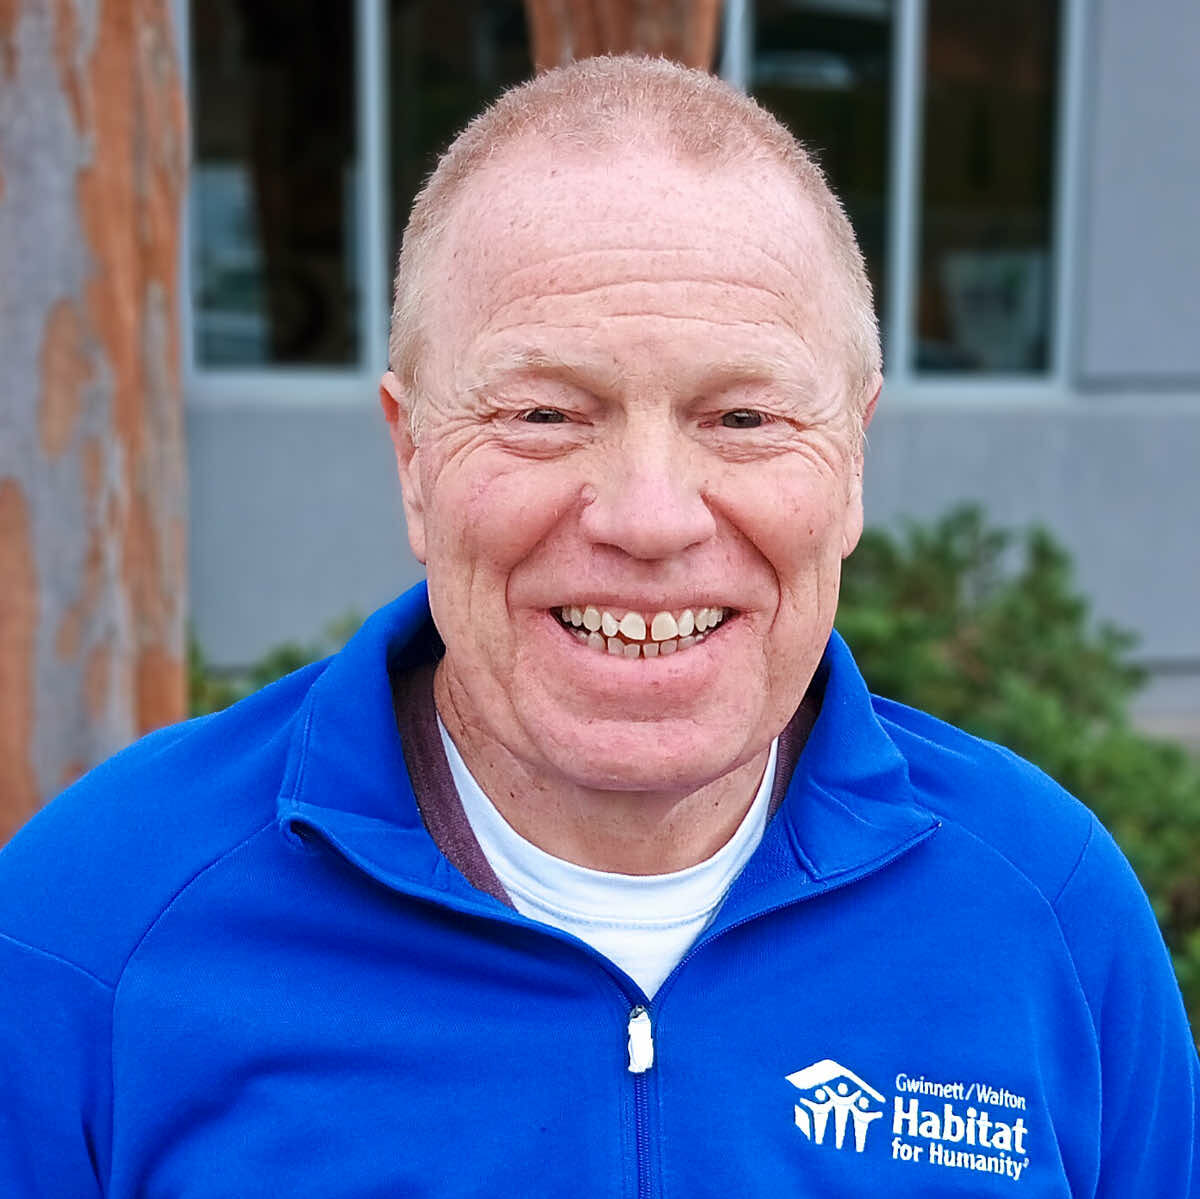 A photo of Scott Funk, our Volunteer Coordinator, outside of the Gwinnett/Walton Habitat for Humanity offices.